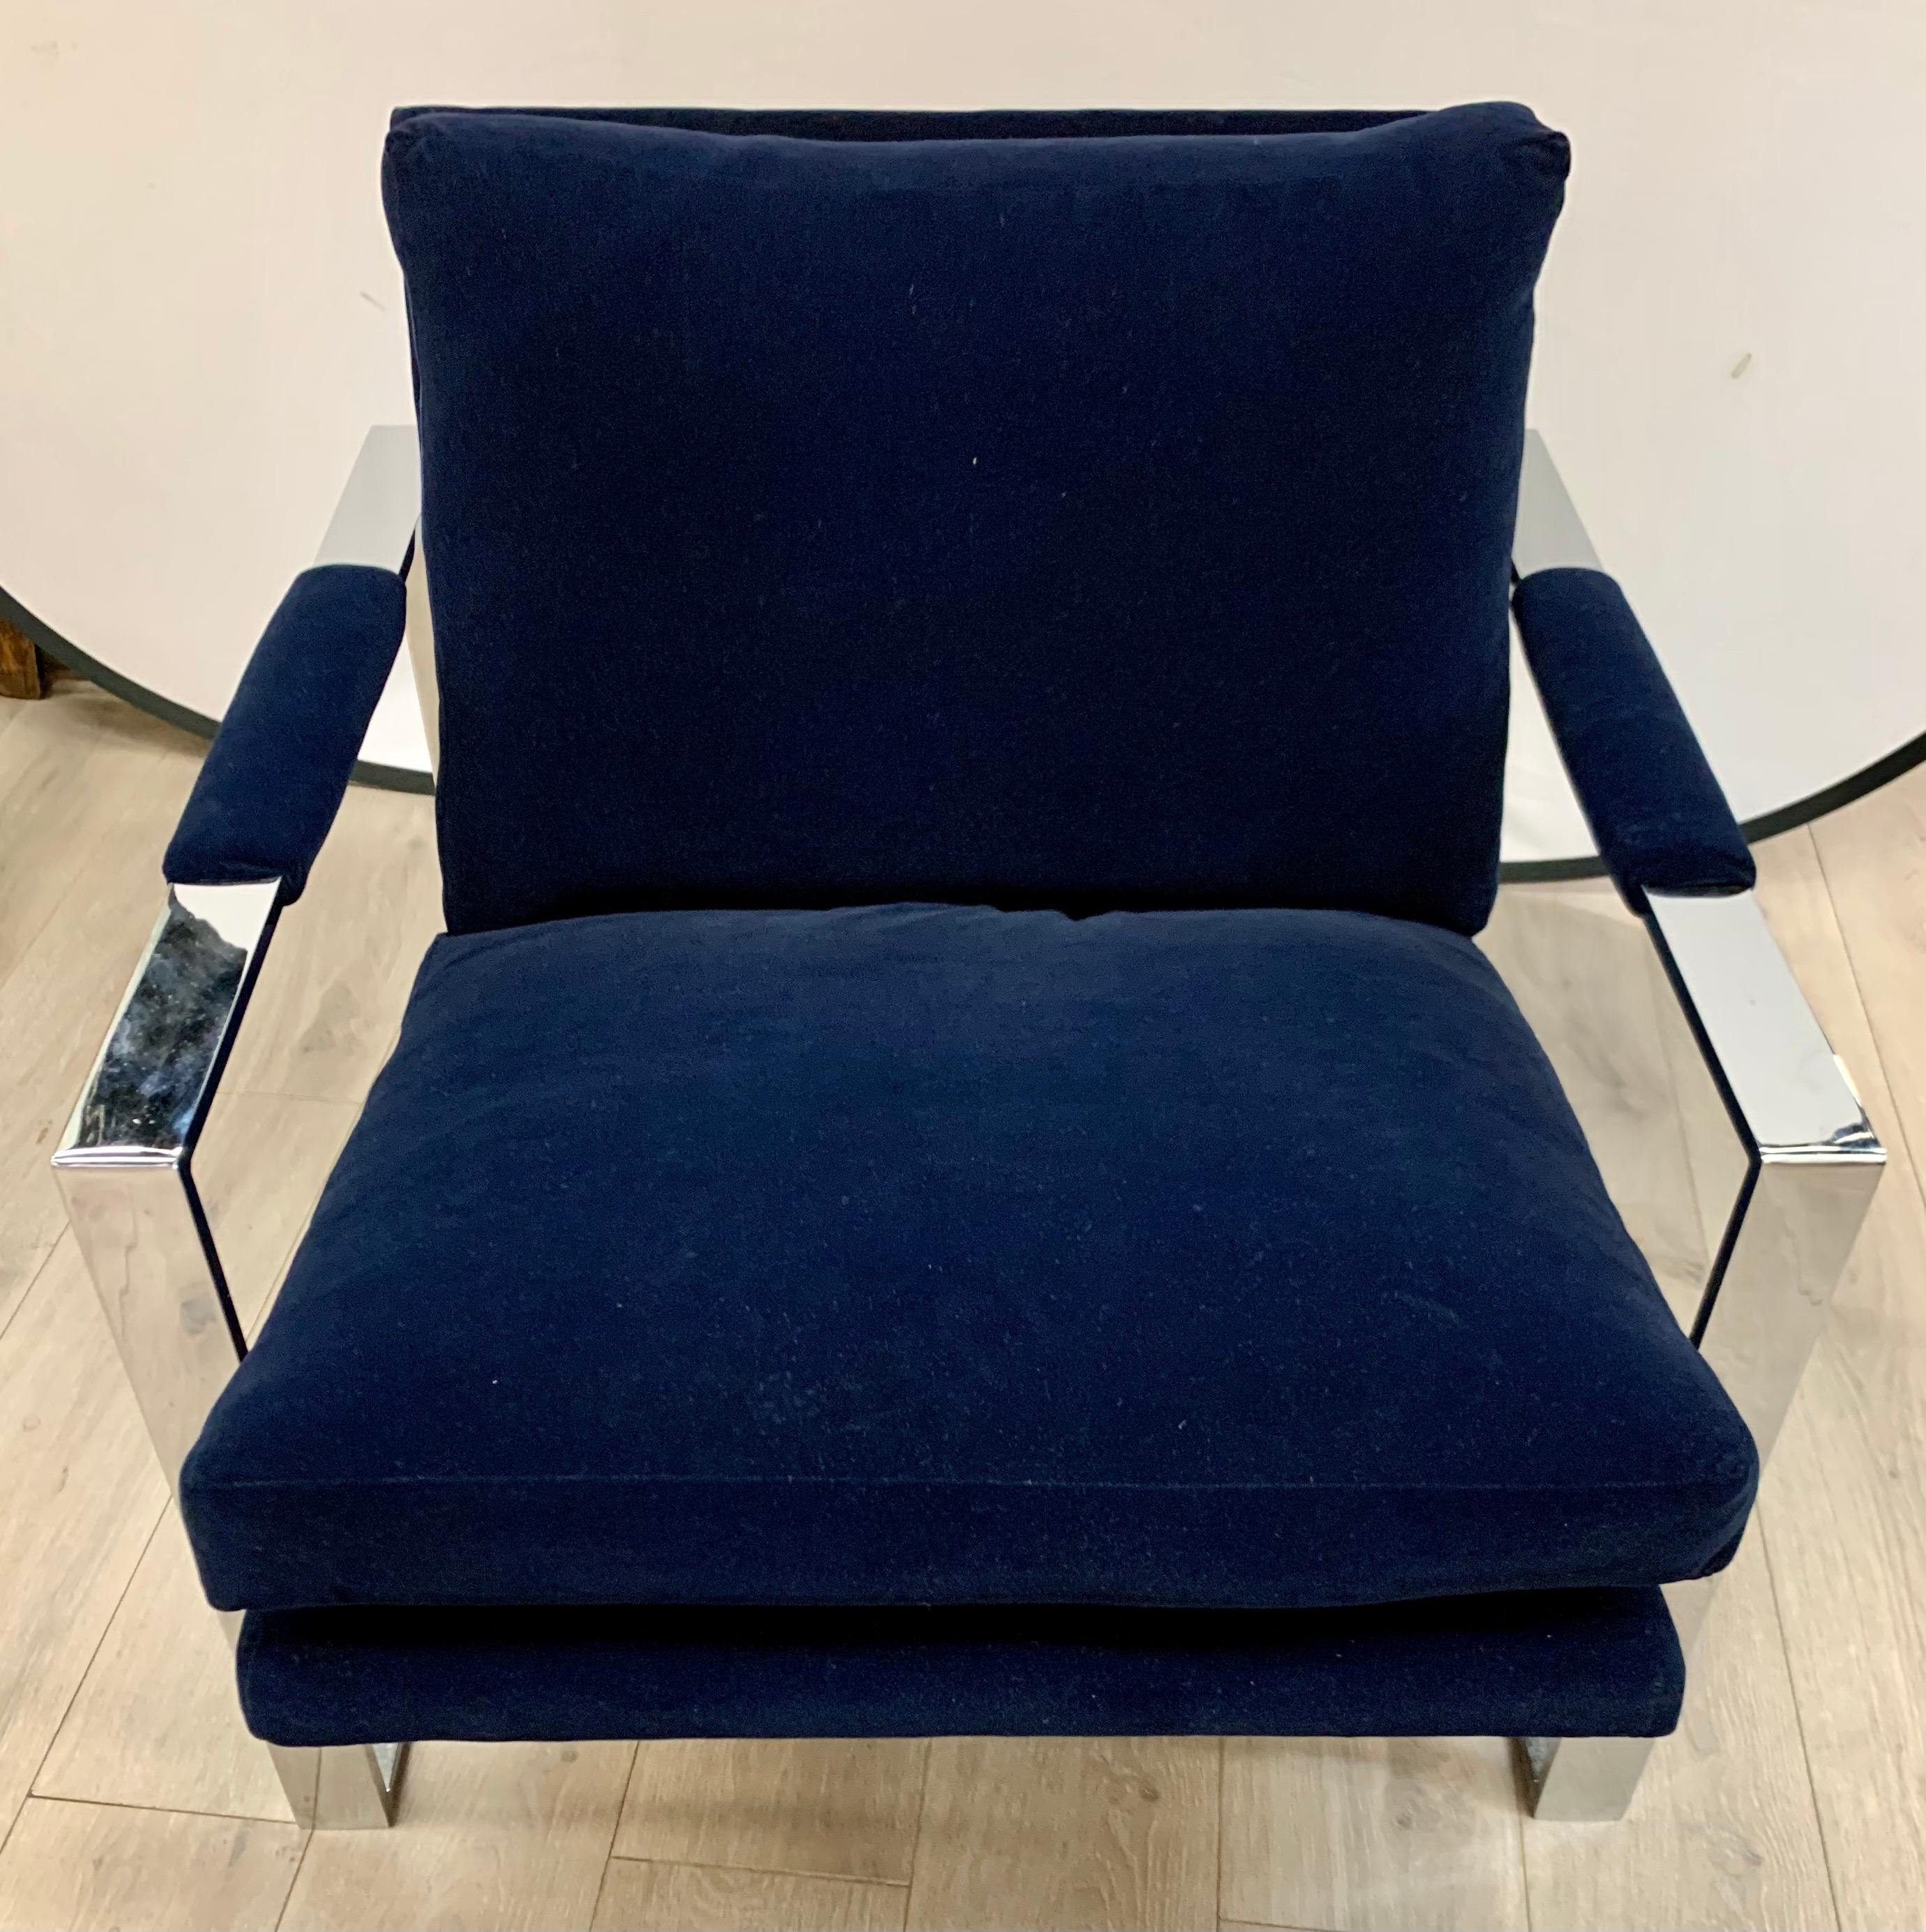 Newly upholstered in a luxurious solid navy blue velvet fabric and polished steel frame, this chair is sure to impress. The chair is heavy and has lines to die for. All dimensions are below. Now, more than ever, home is where the heart is.